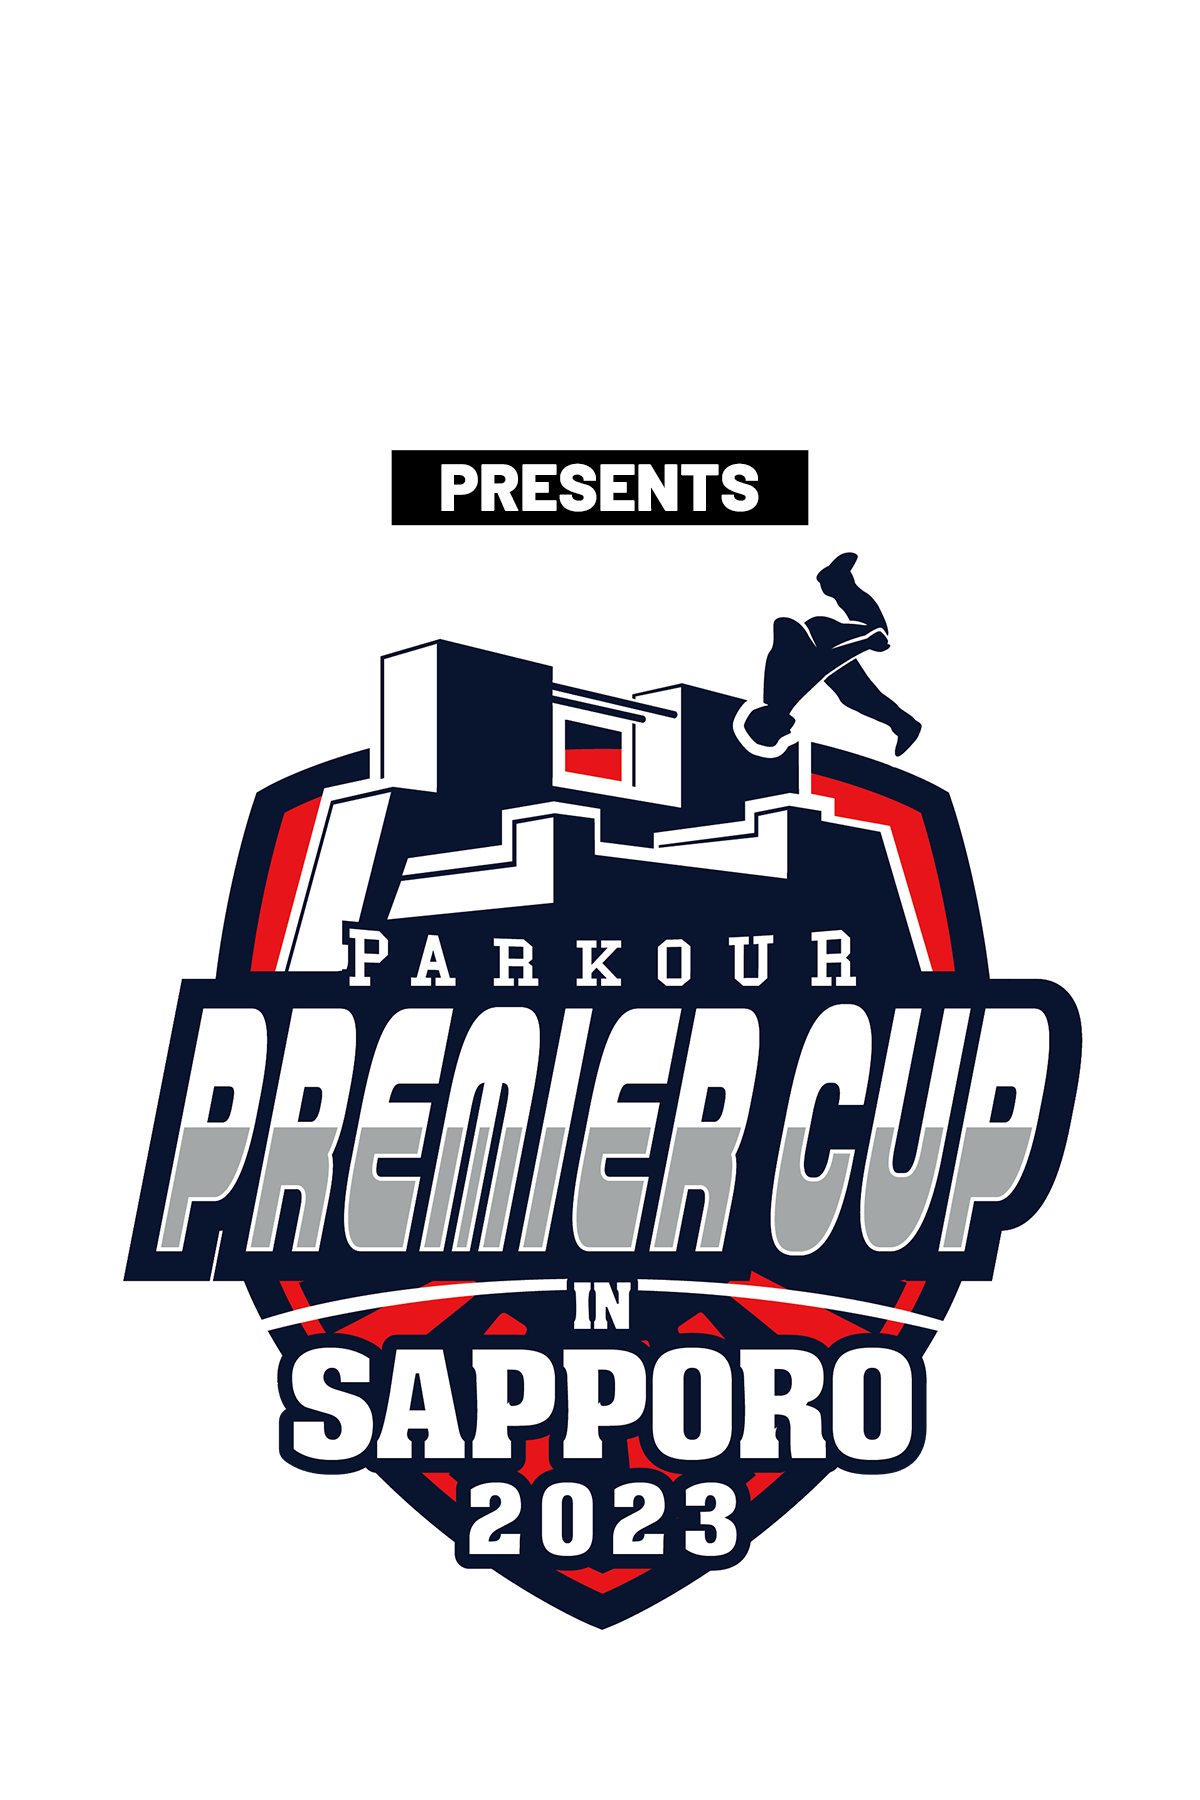 TOKIOインカラミ presents<br>PARKOUR PREMIER CUP 2023 <br>in 札幌